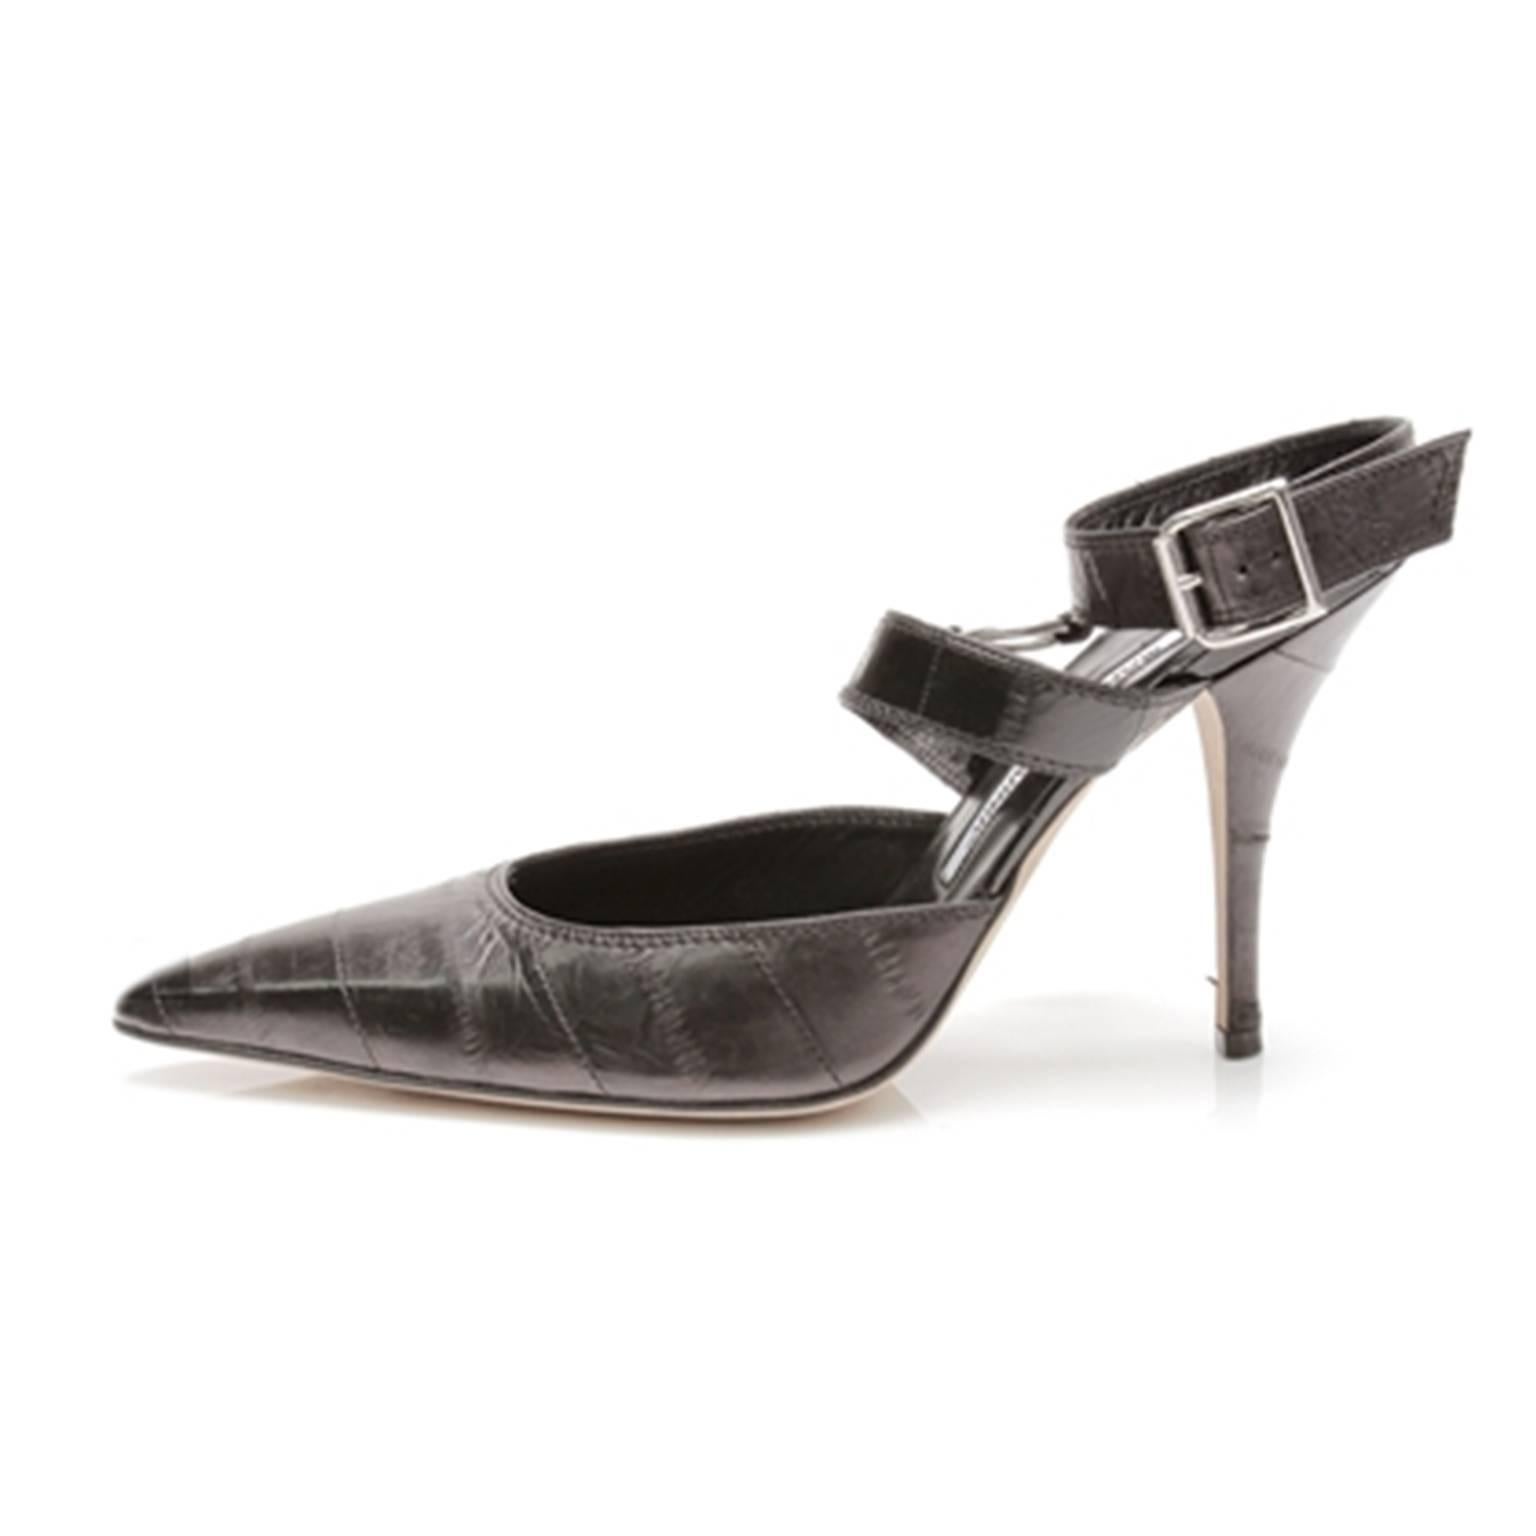 These Manolo Blahnik black eel skin heels are the finishing touches to any classic look. A timeless pointed toe is given a modern update with carefully considered straps and stunning silver-tone rings. Daytime meeting and evening affair approved,